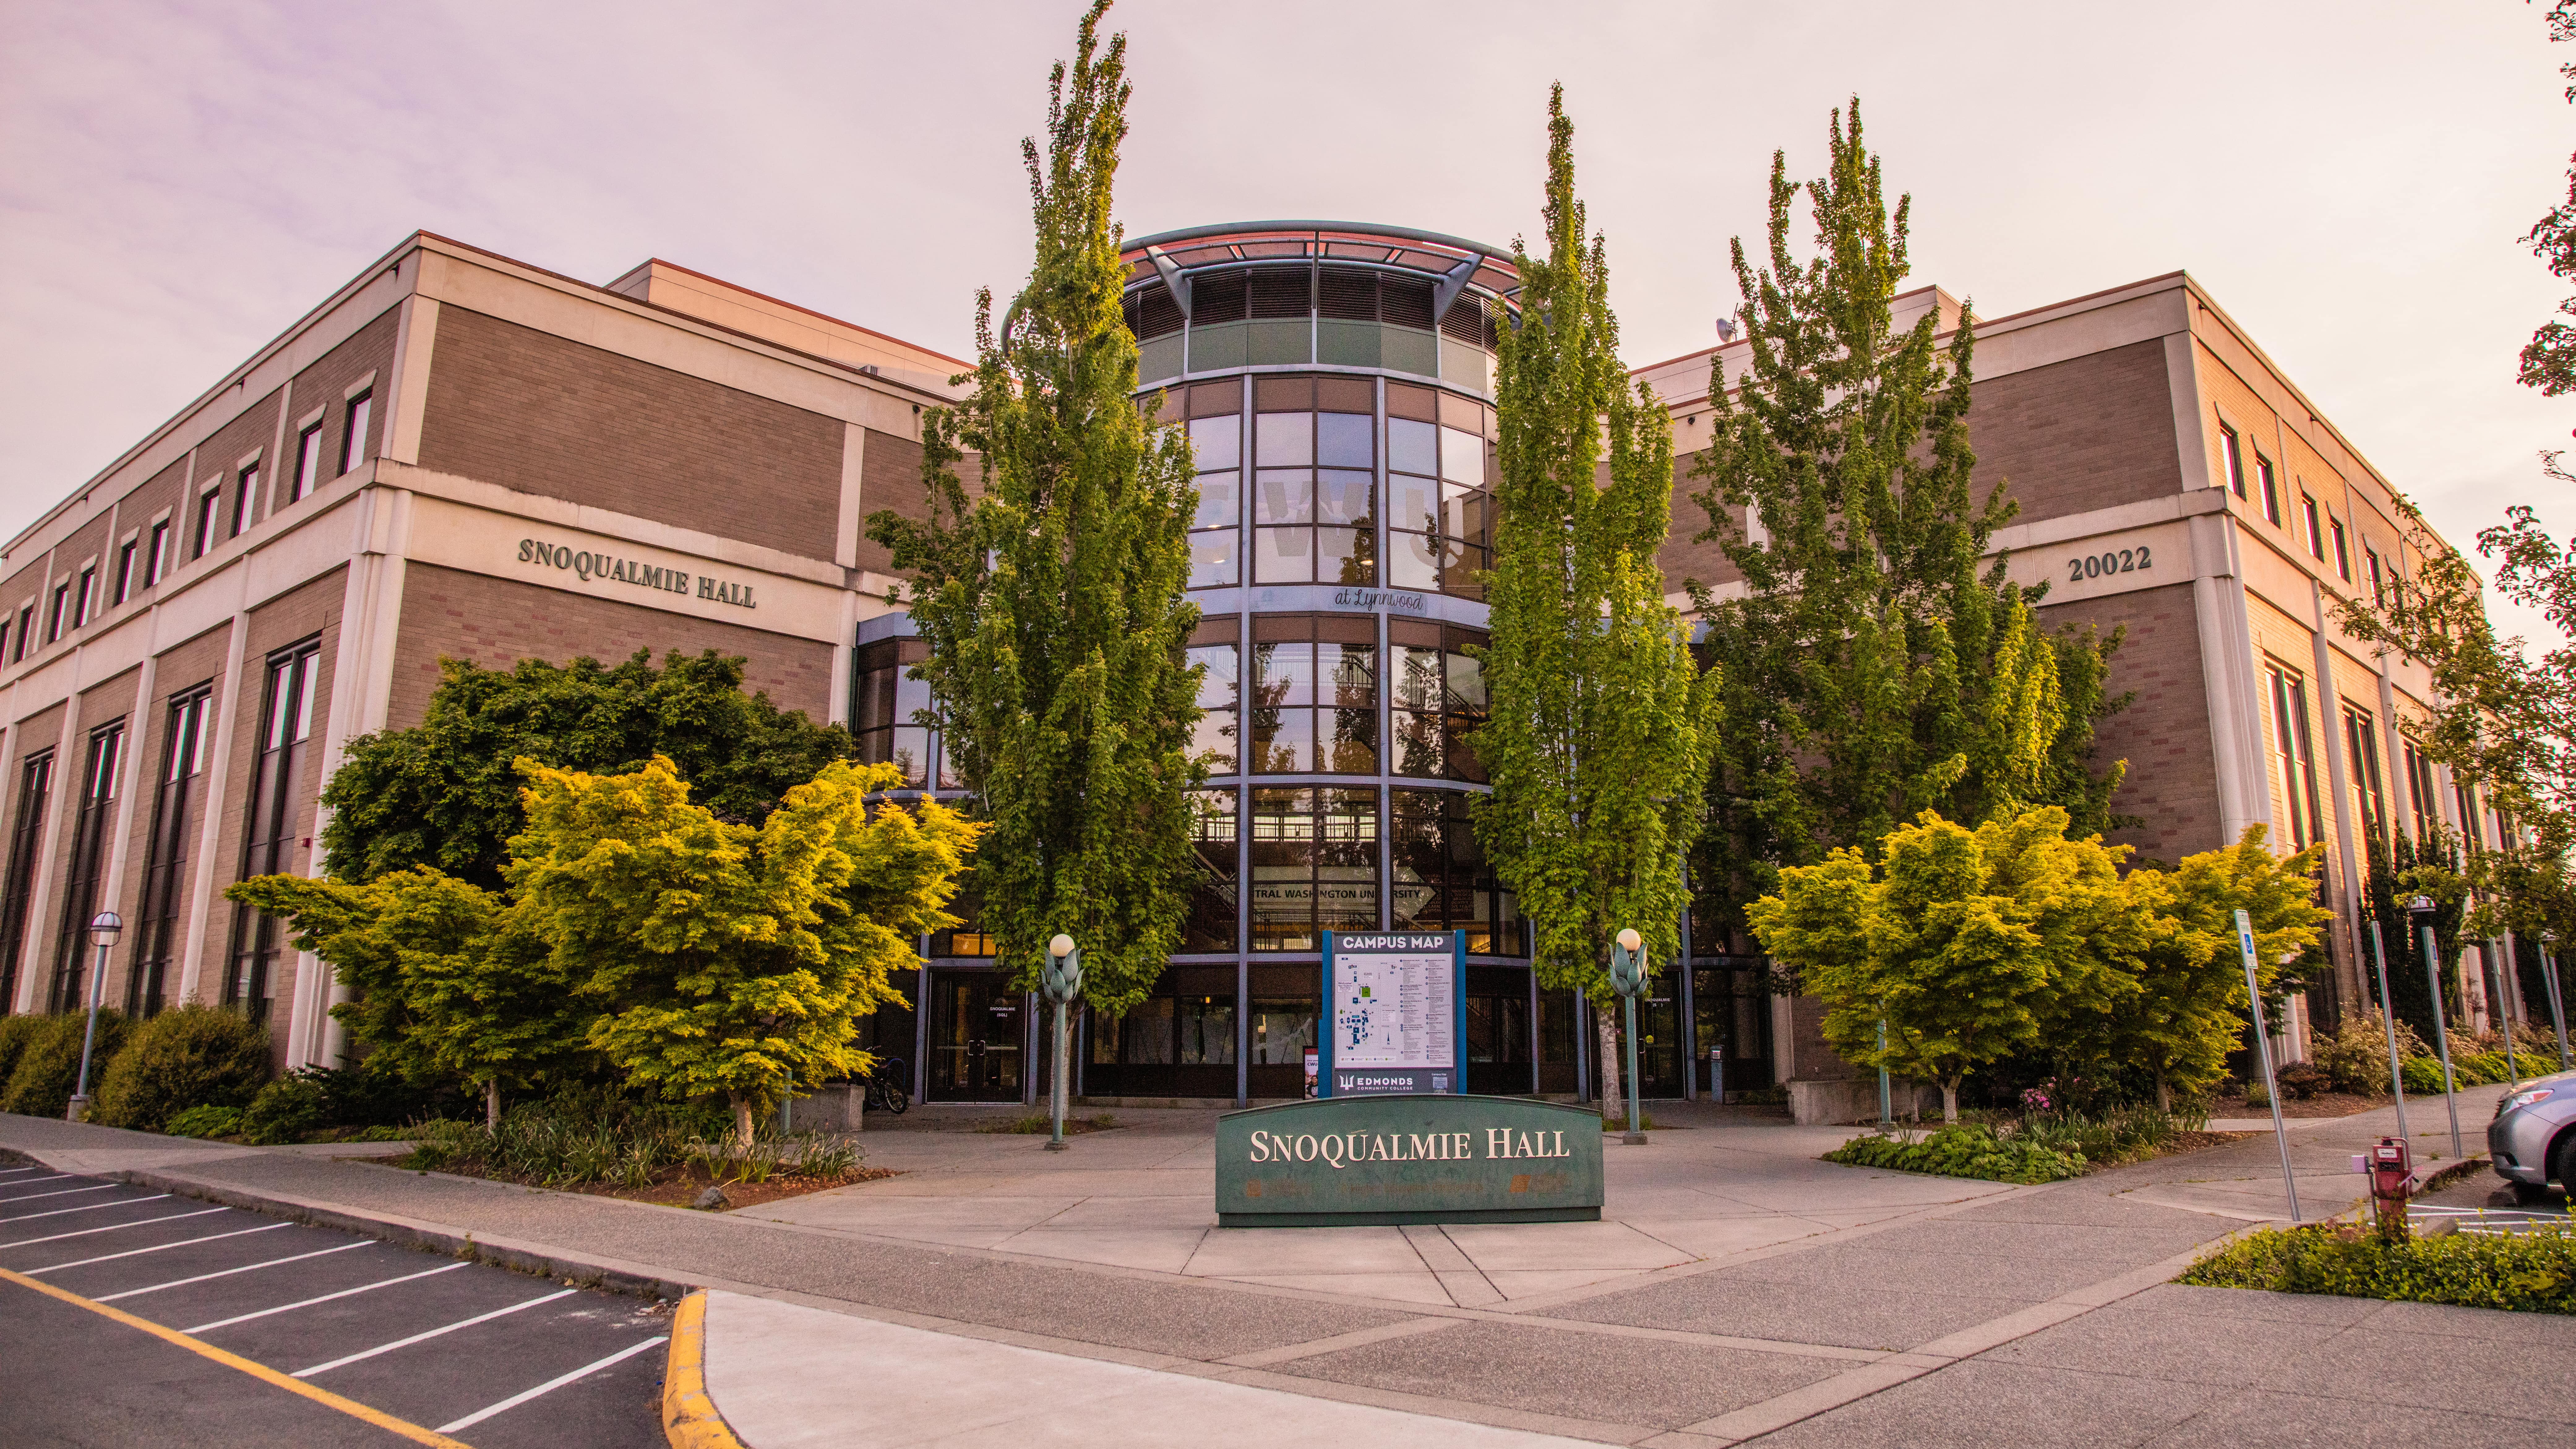 A building on the Lynnwood CWU campus. There is a sign in front that says "Snoqualmie Hall"